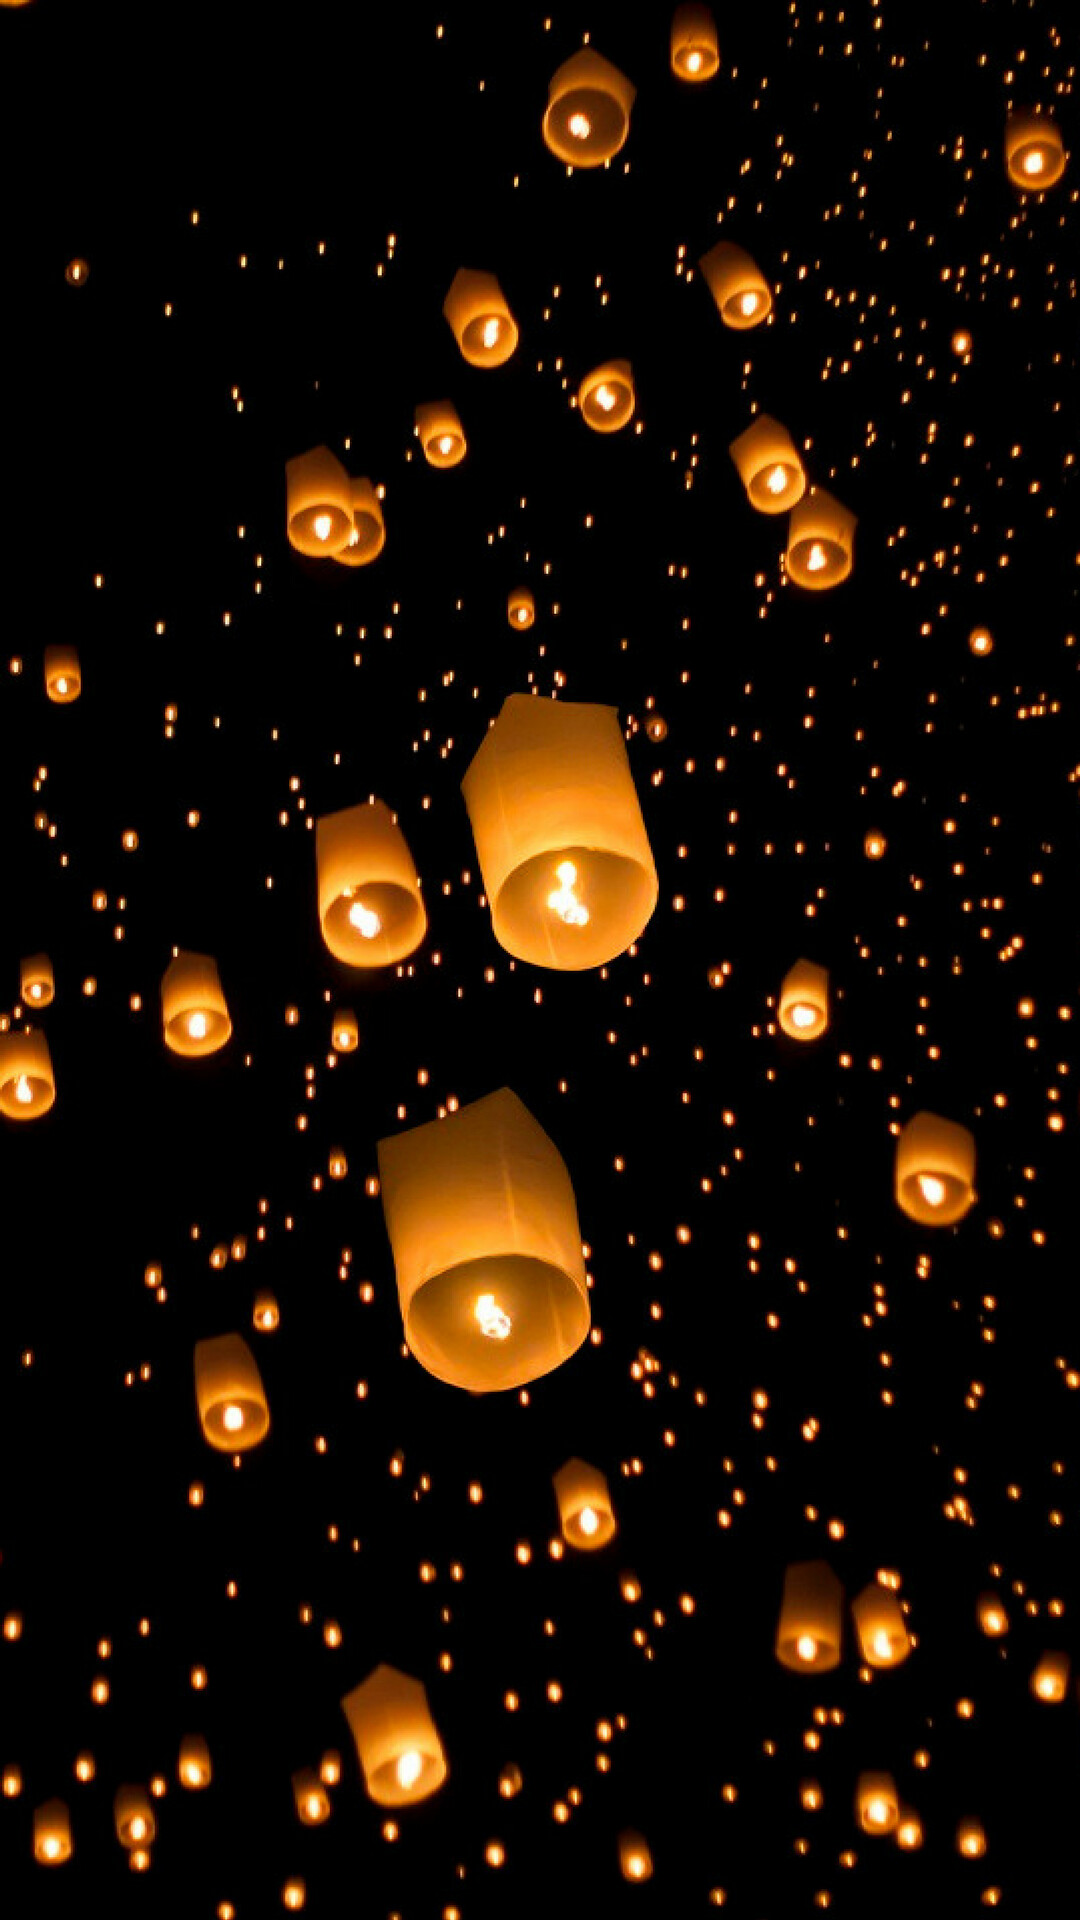 Lanterns: A case for enclosing a light and protecting it from the wind. 1080x1920 Full HD Background.